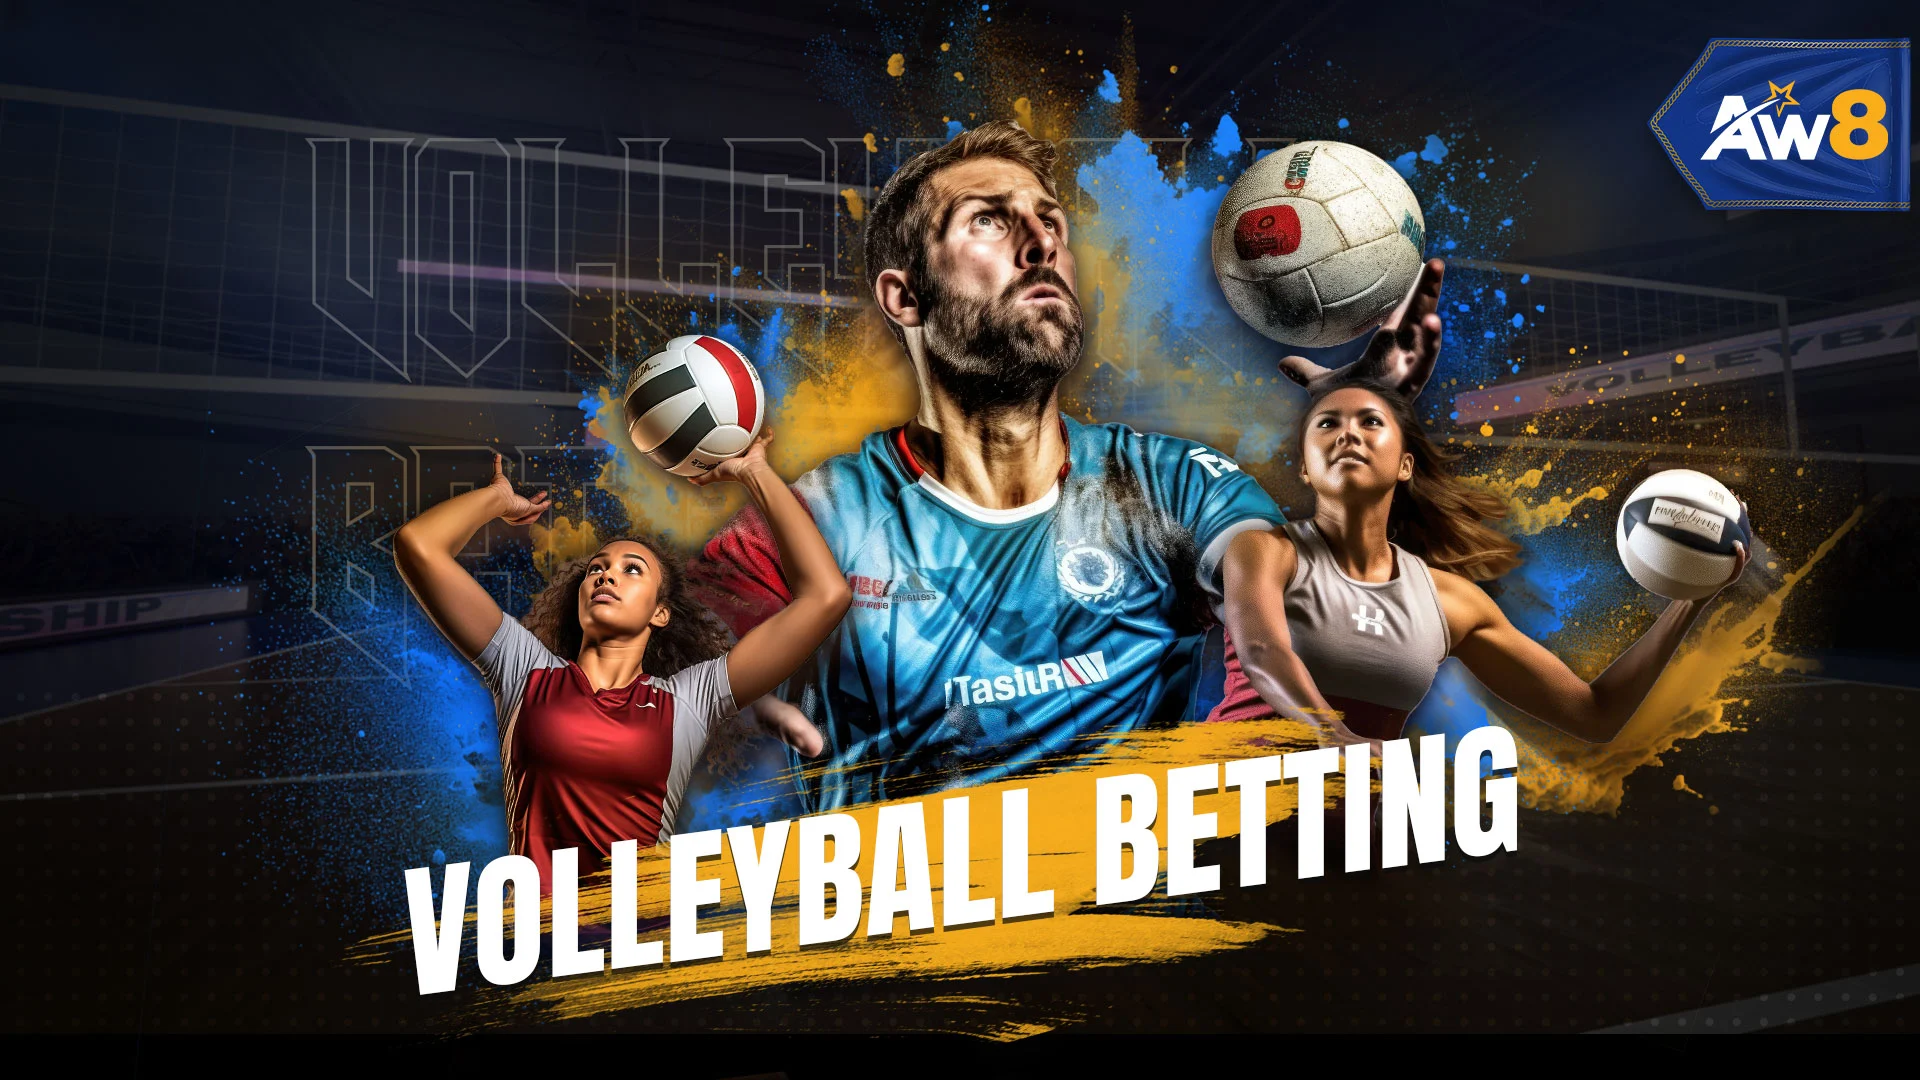 Volleyball Sports Betting in Malaysia By AW8